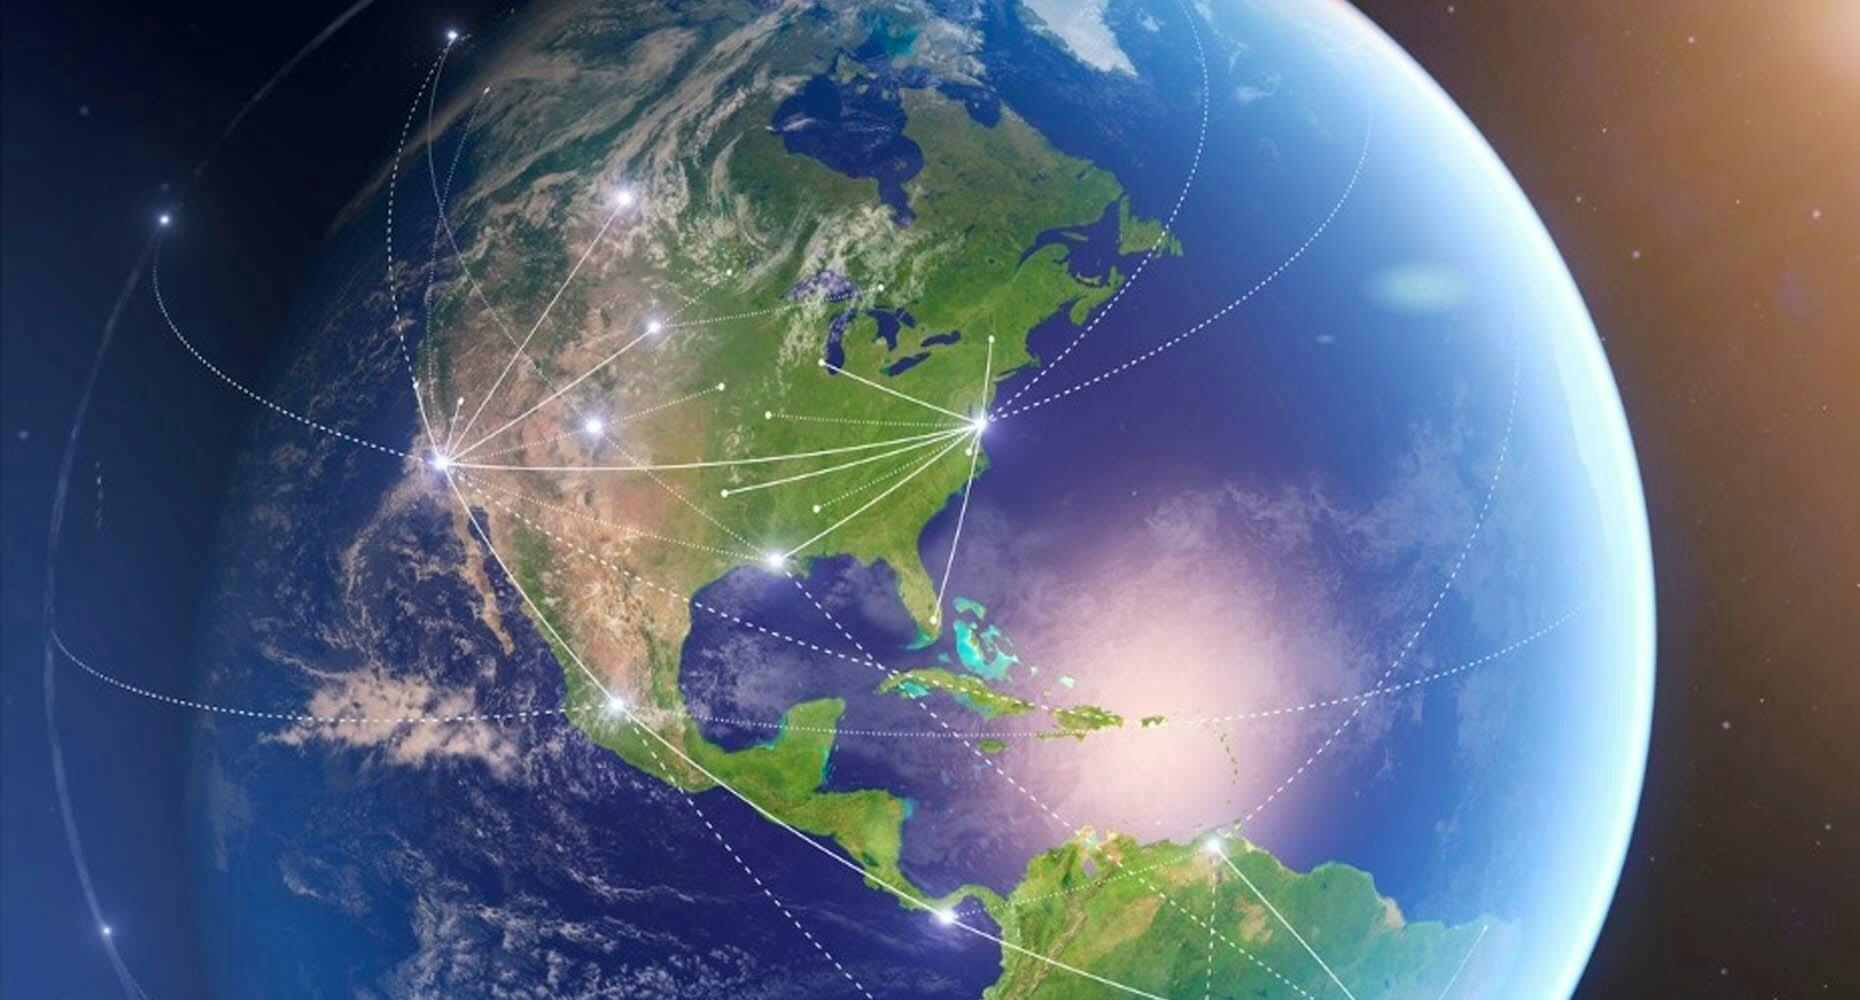 Interconnected world seen from space